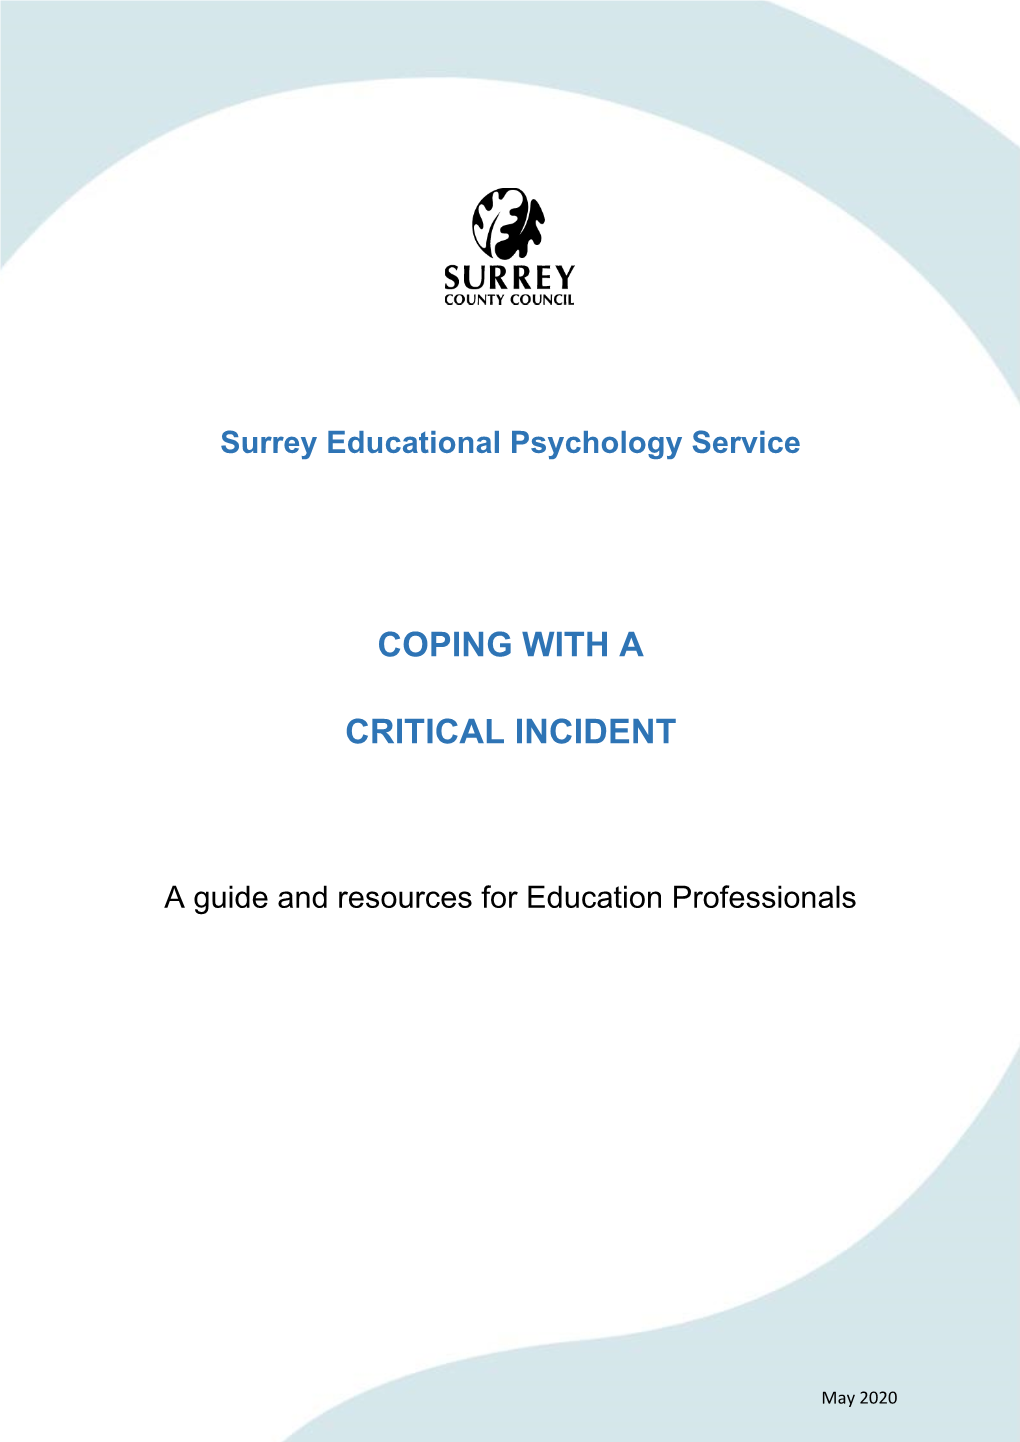 Coping with a Critical Incident